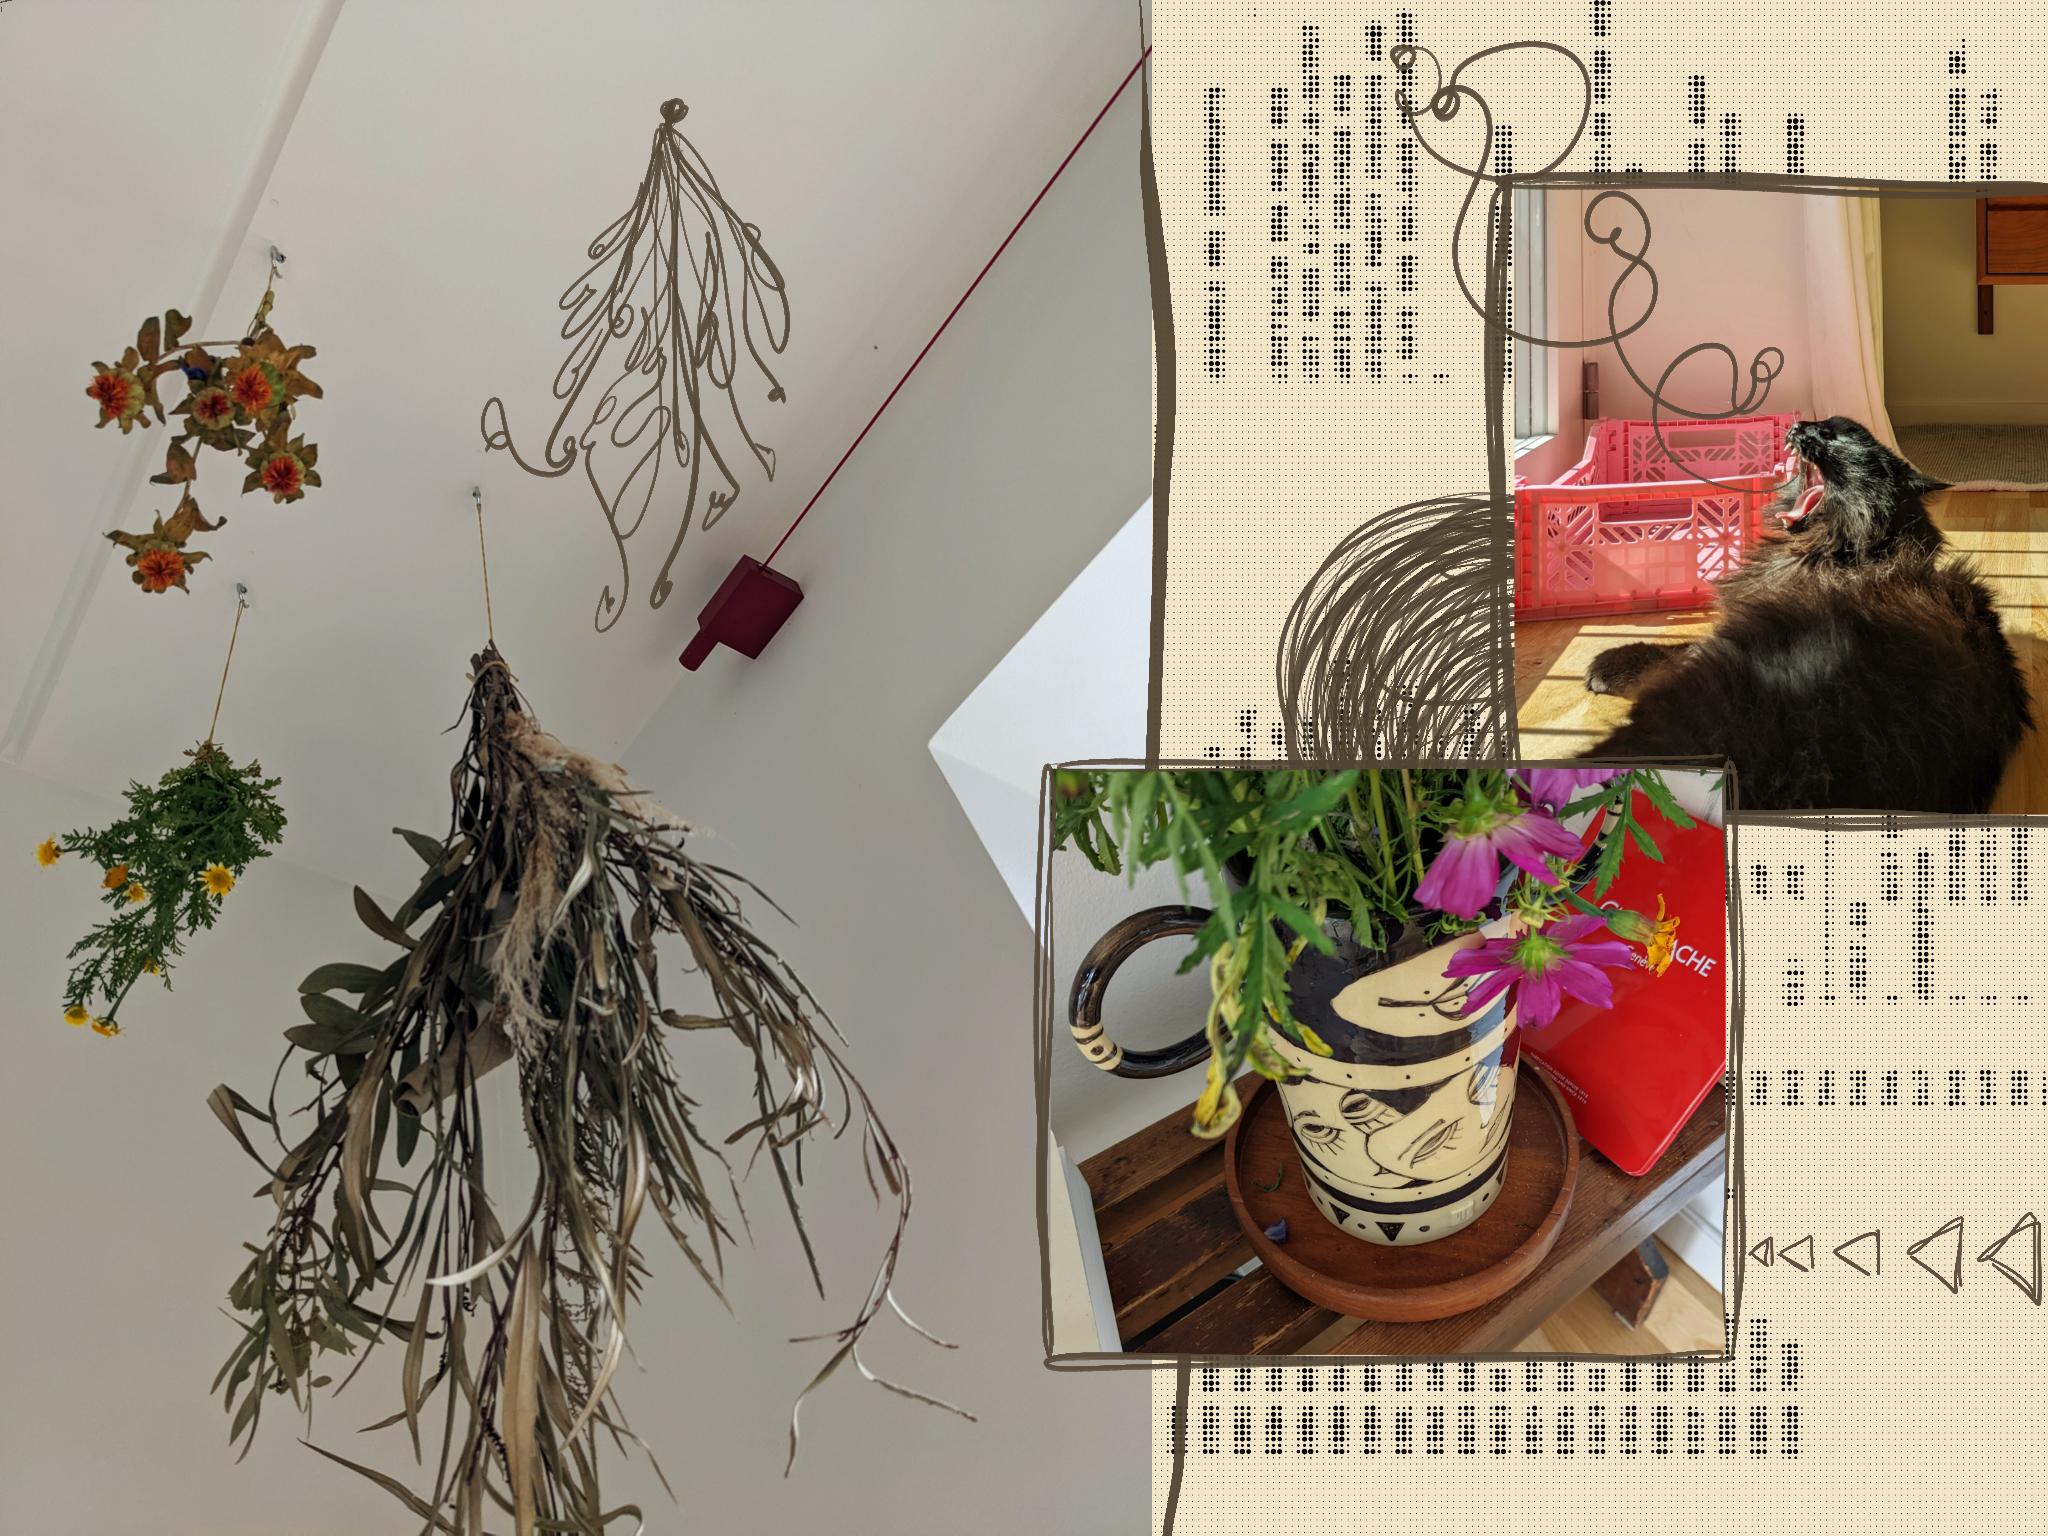 A collage on top of blurred out, pixelated old IBM manual. Photographs include drying flowers hanging from the ceiling, a flack floofy yawning cat lying on the floor next to a pink crate, and a vase with large round handles with cosmos flowers peeking out. The collage is drawn over in jagged, slightly unstable squiggly lines.